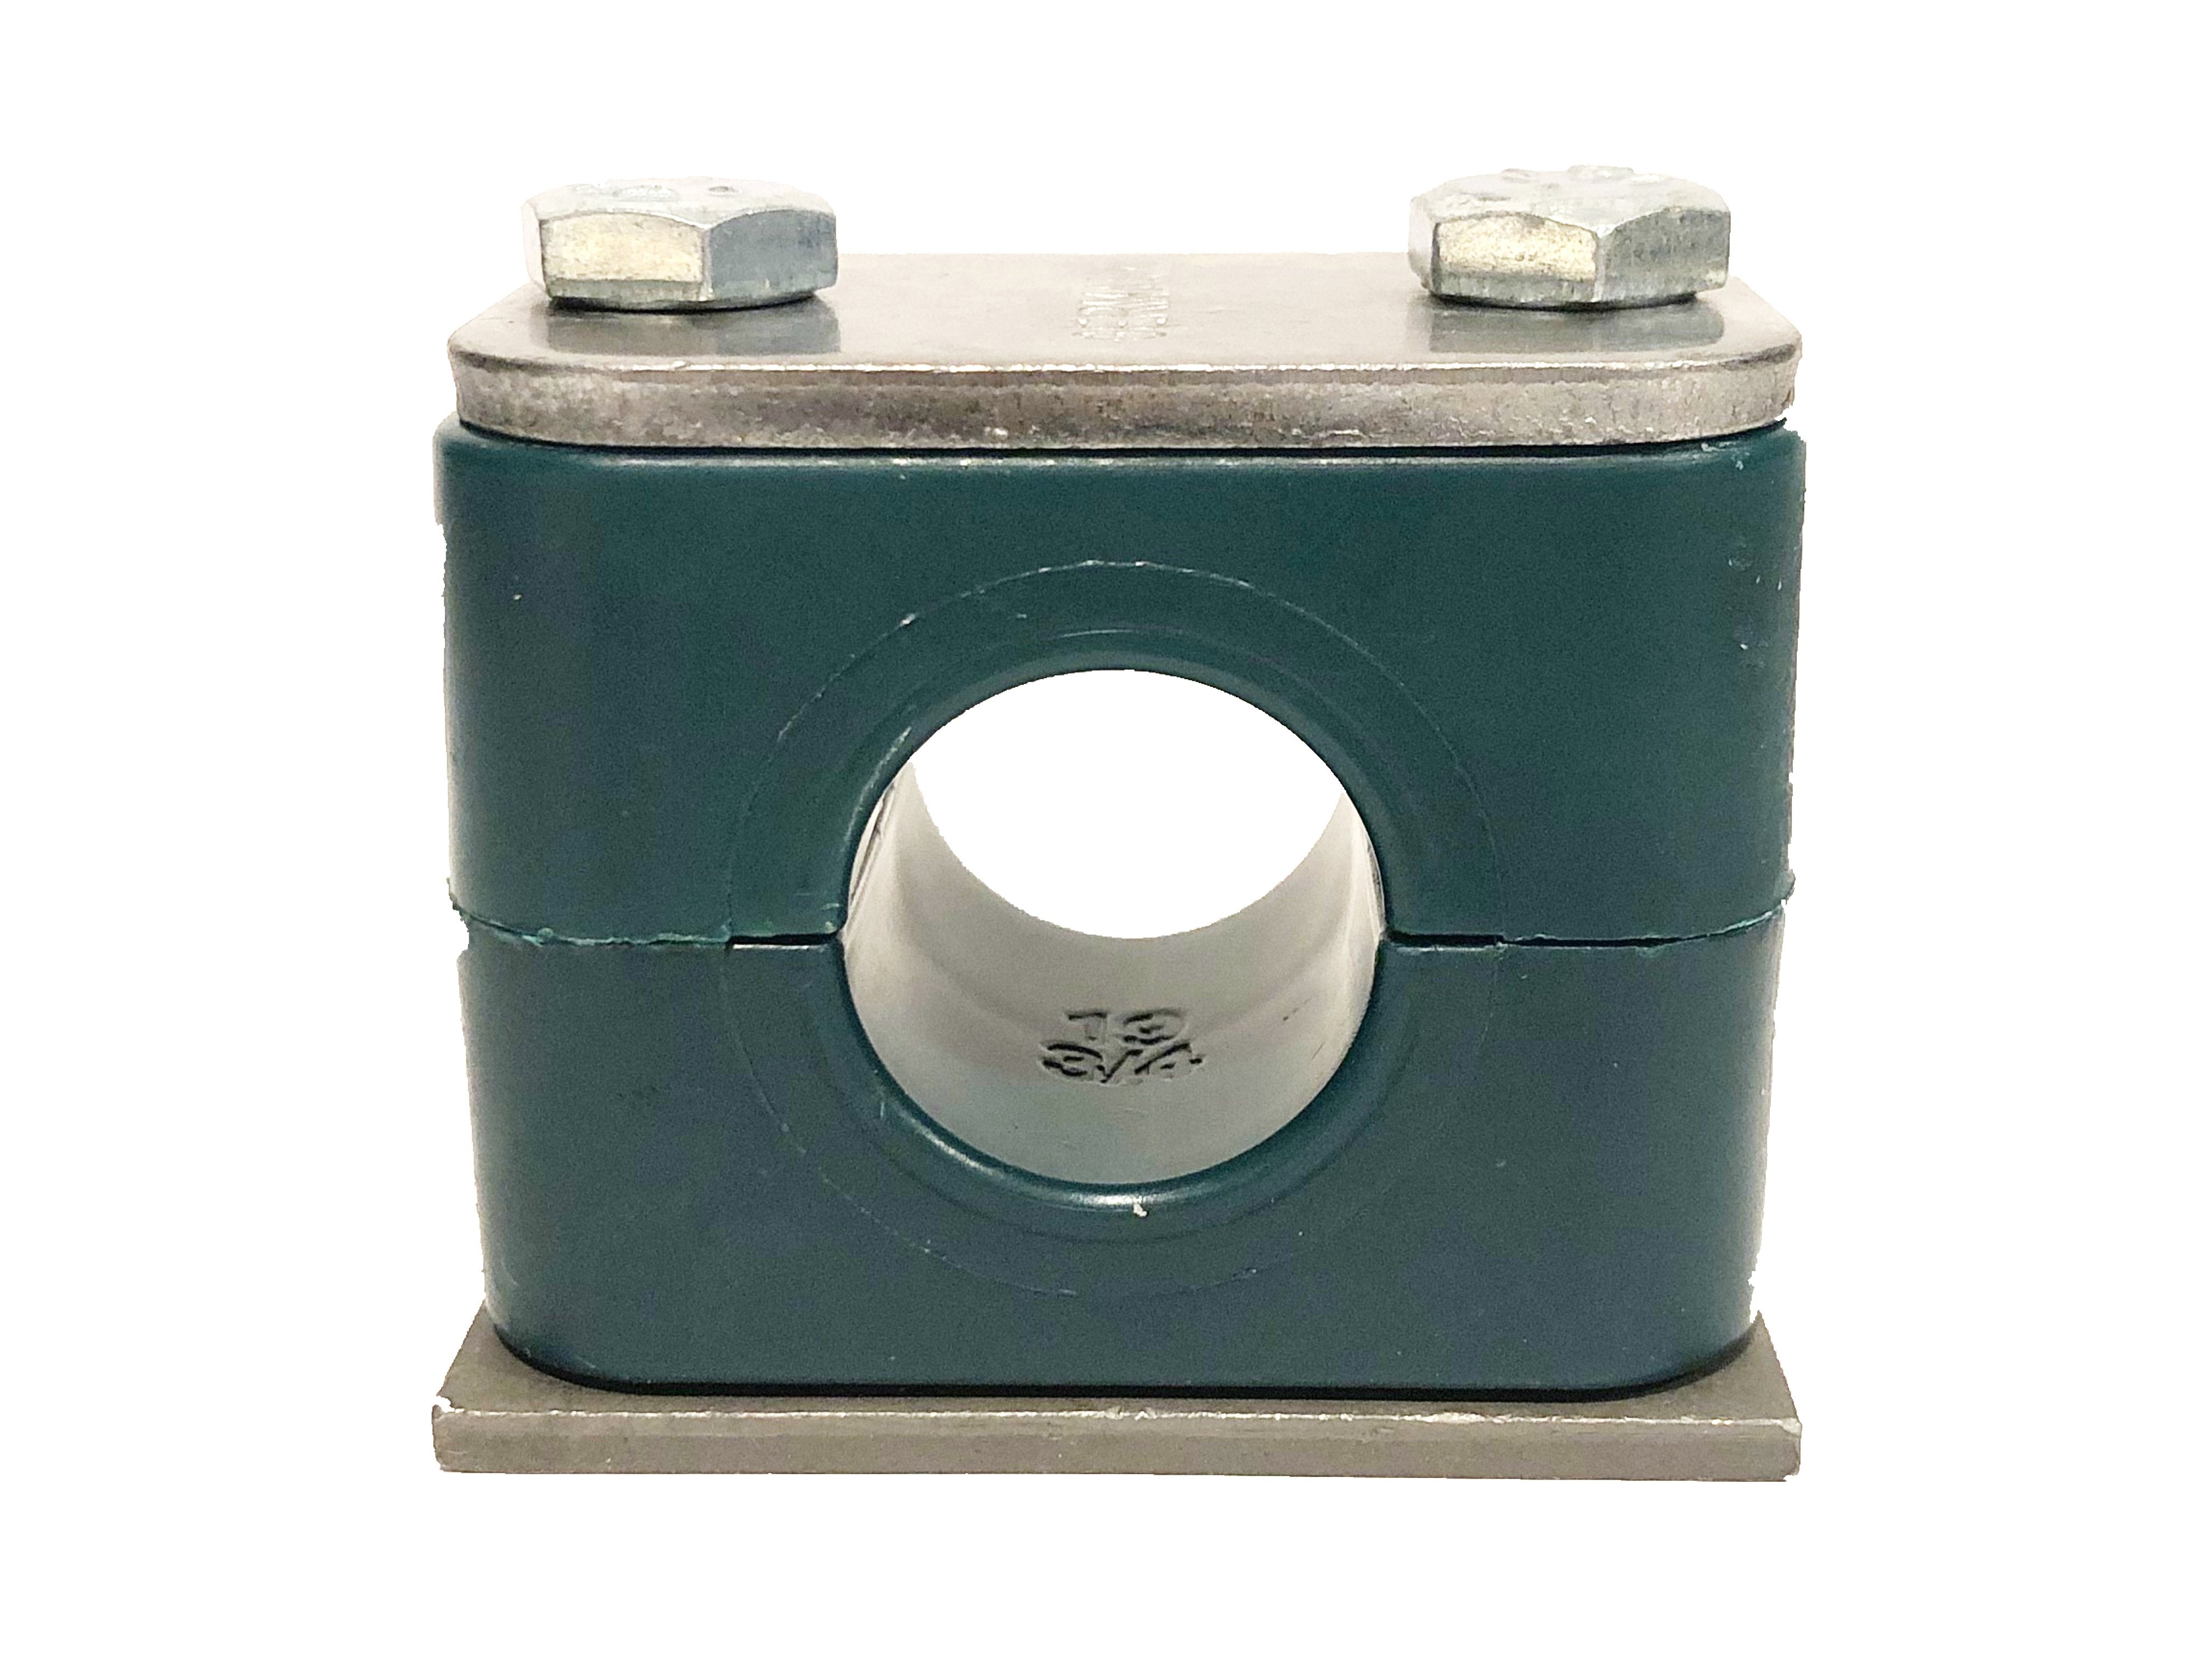 SP-213.5-PP-H-DP-AS-U-W5 : Stauff Clamp, Single Weld Plate, 0.53" (13.5mm) OD, for 1/4" Pipe, Green PP Insert, Smooth Interior, 316SS